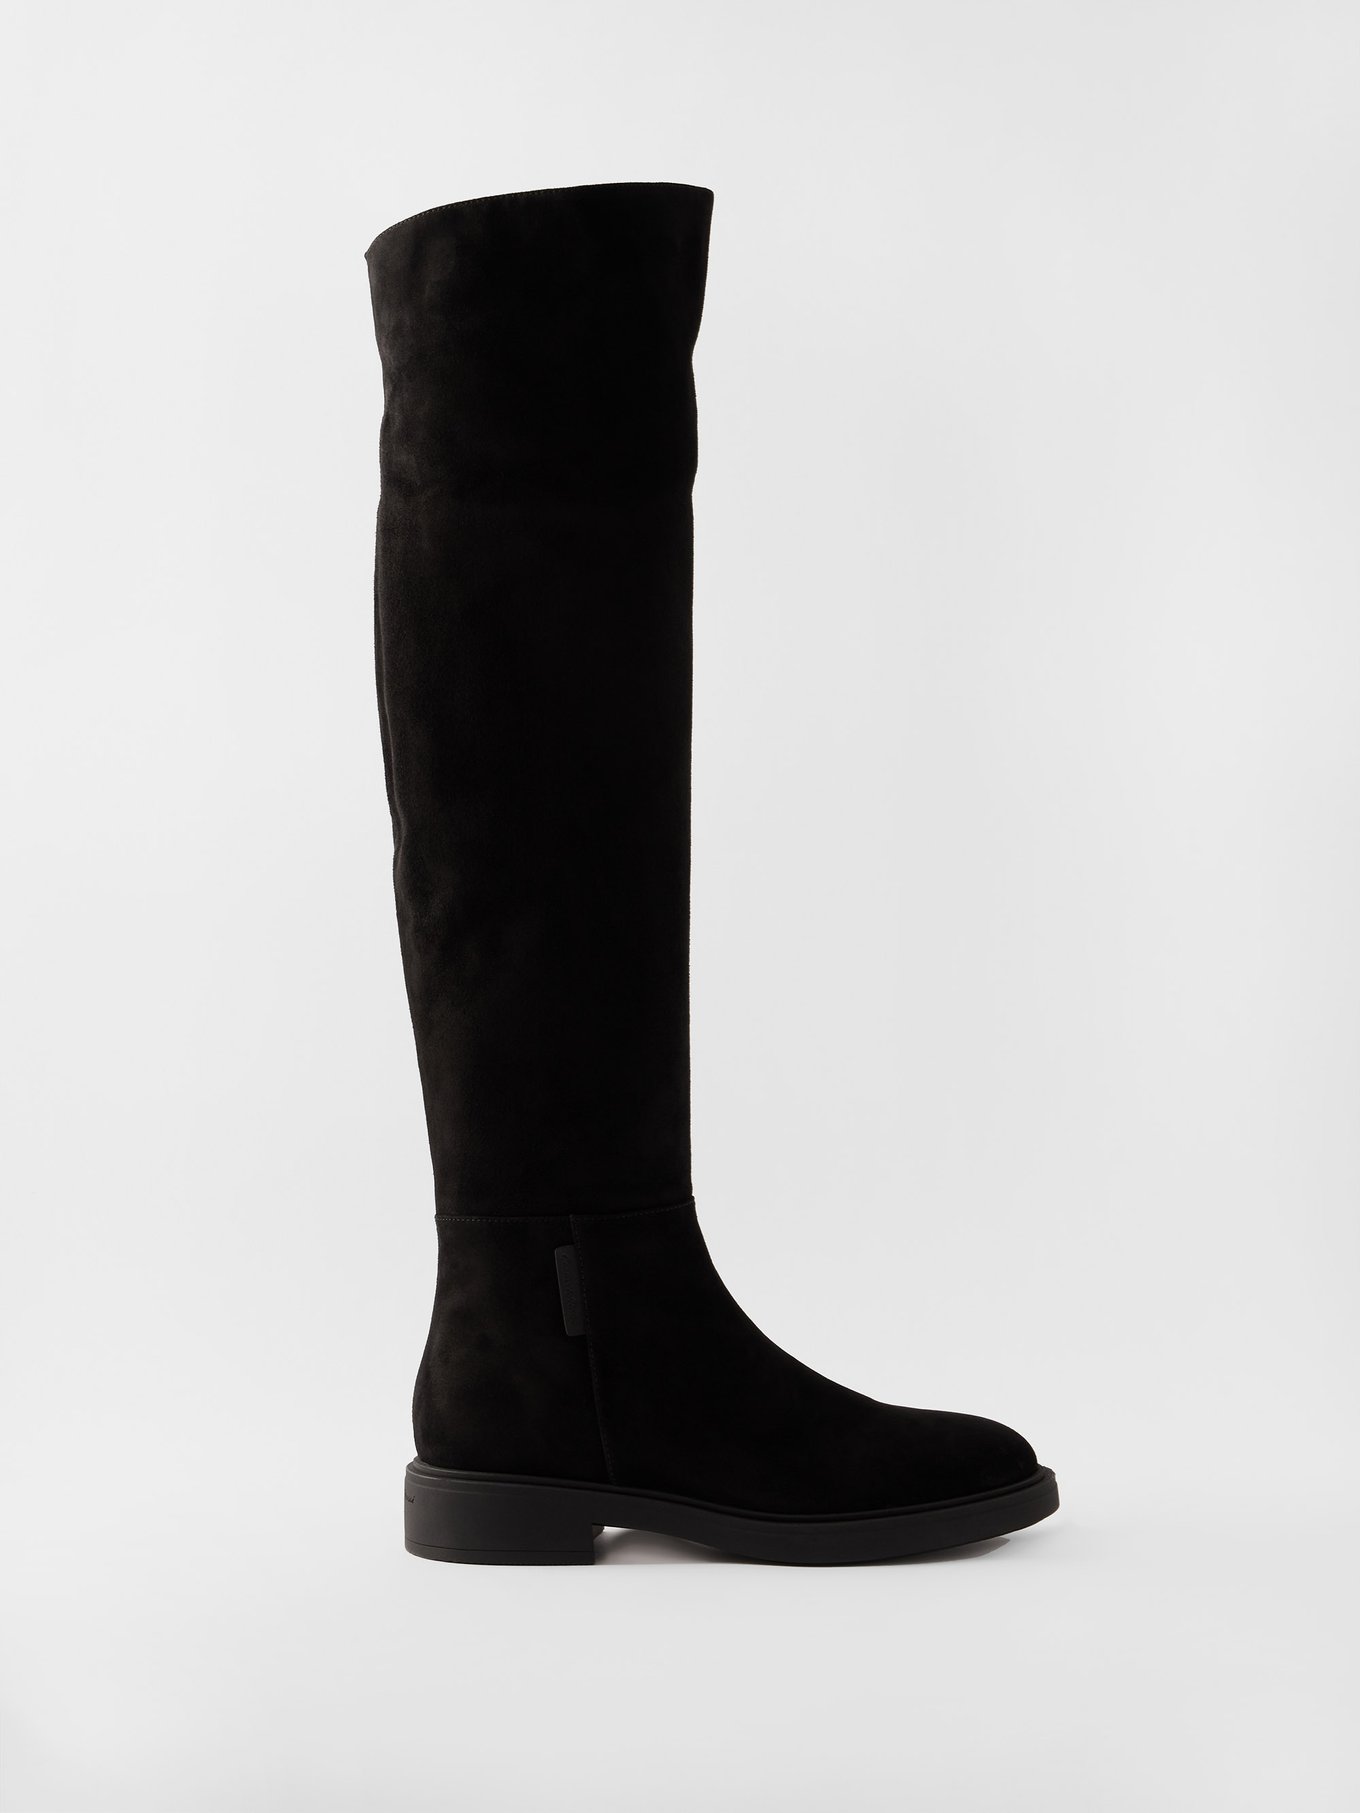 Lexington suede over-the-knee boots | Gianvito Rossi